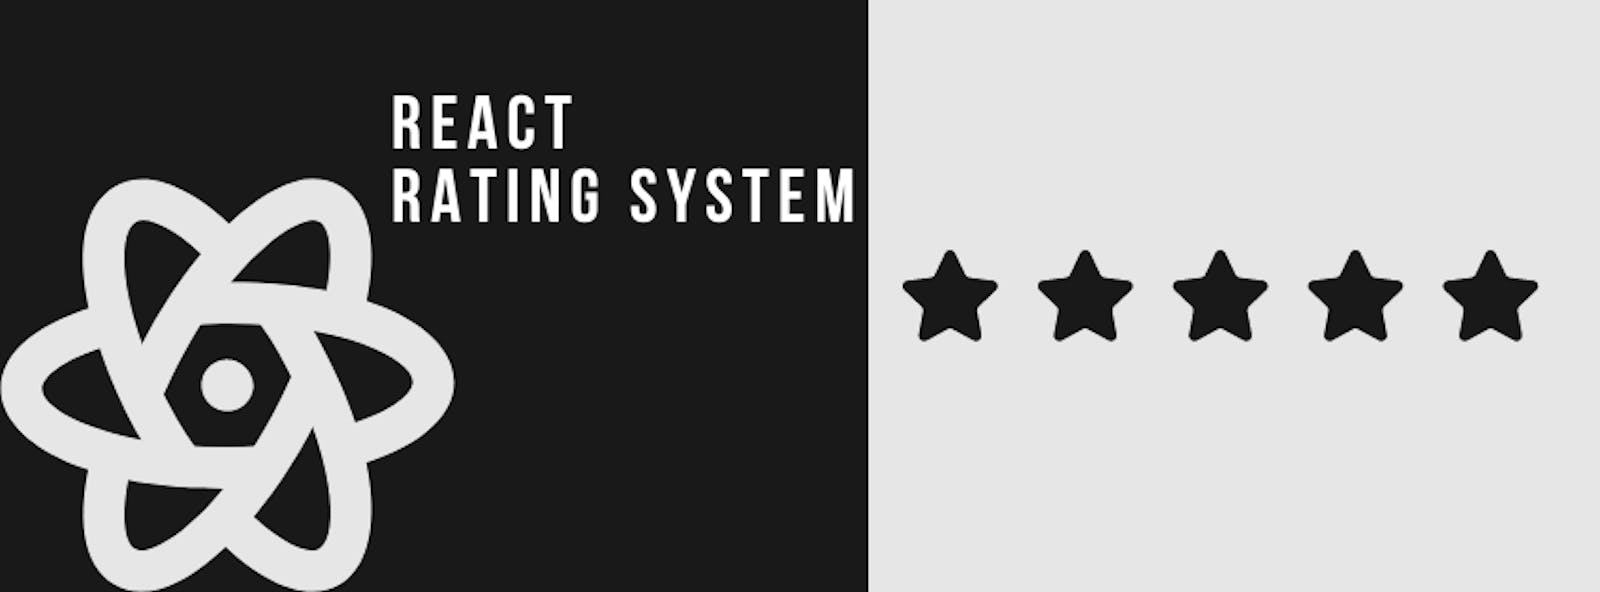 Step-by-Step Guide to Building a Rating System in React